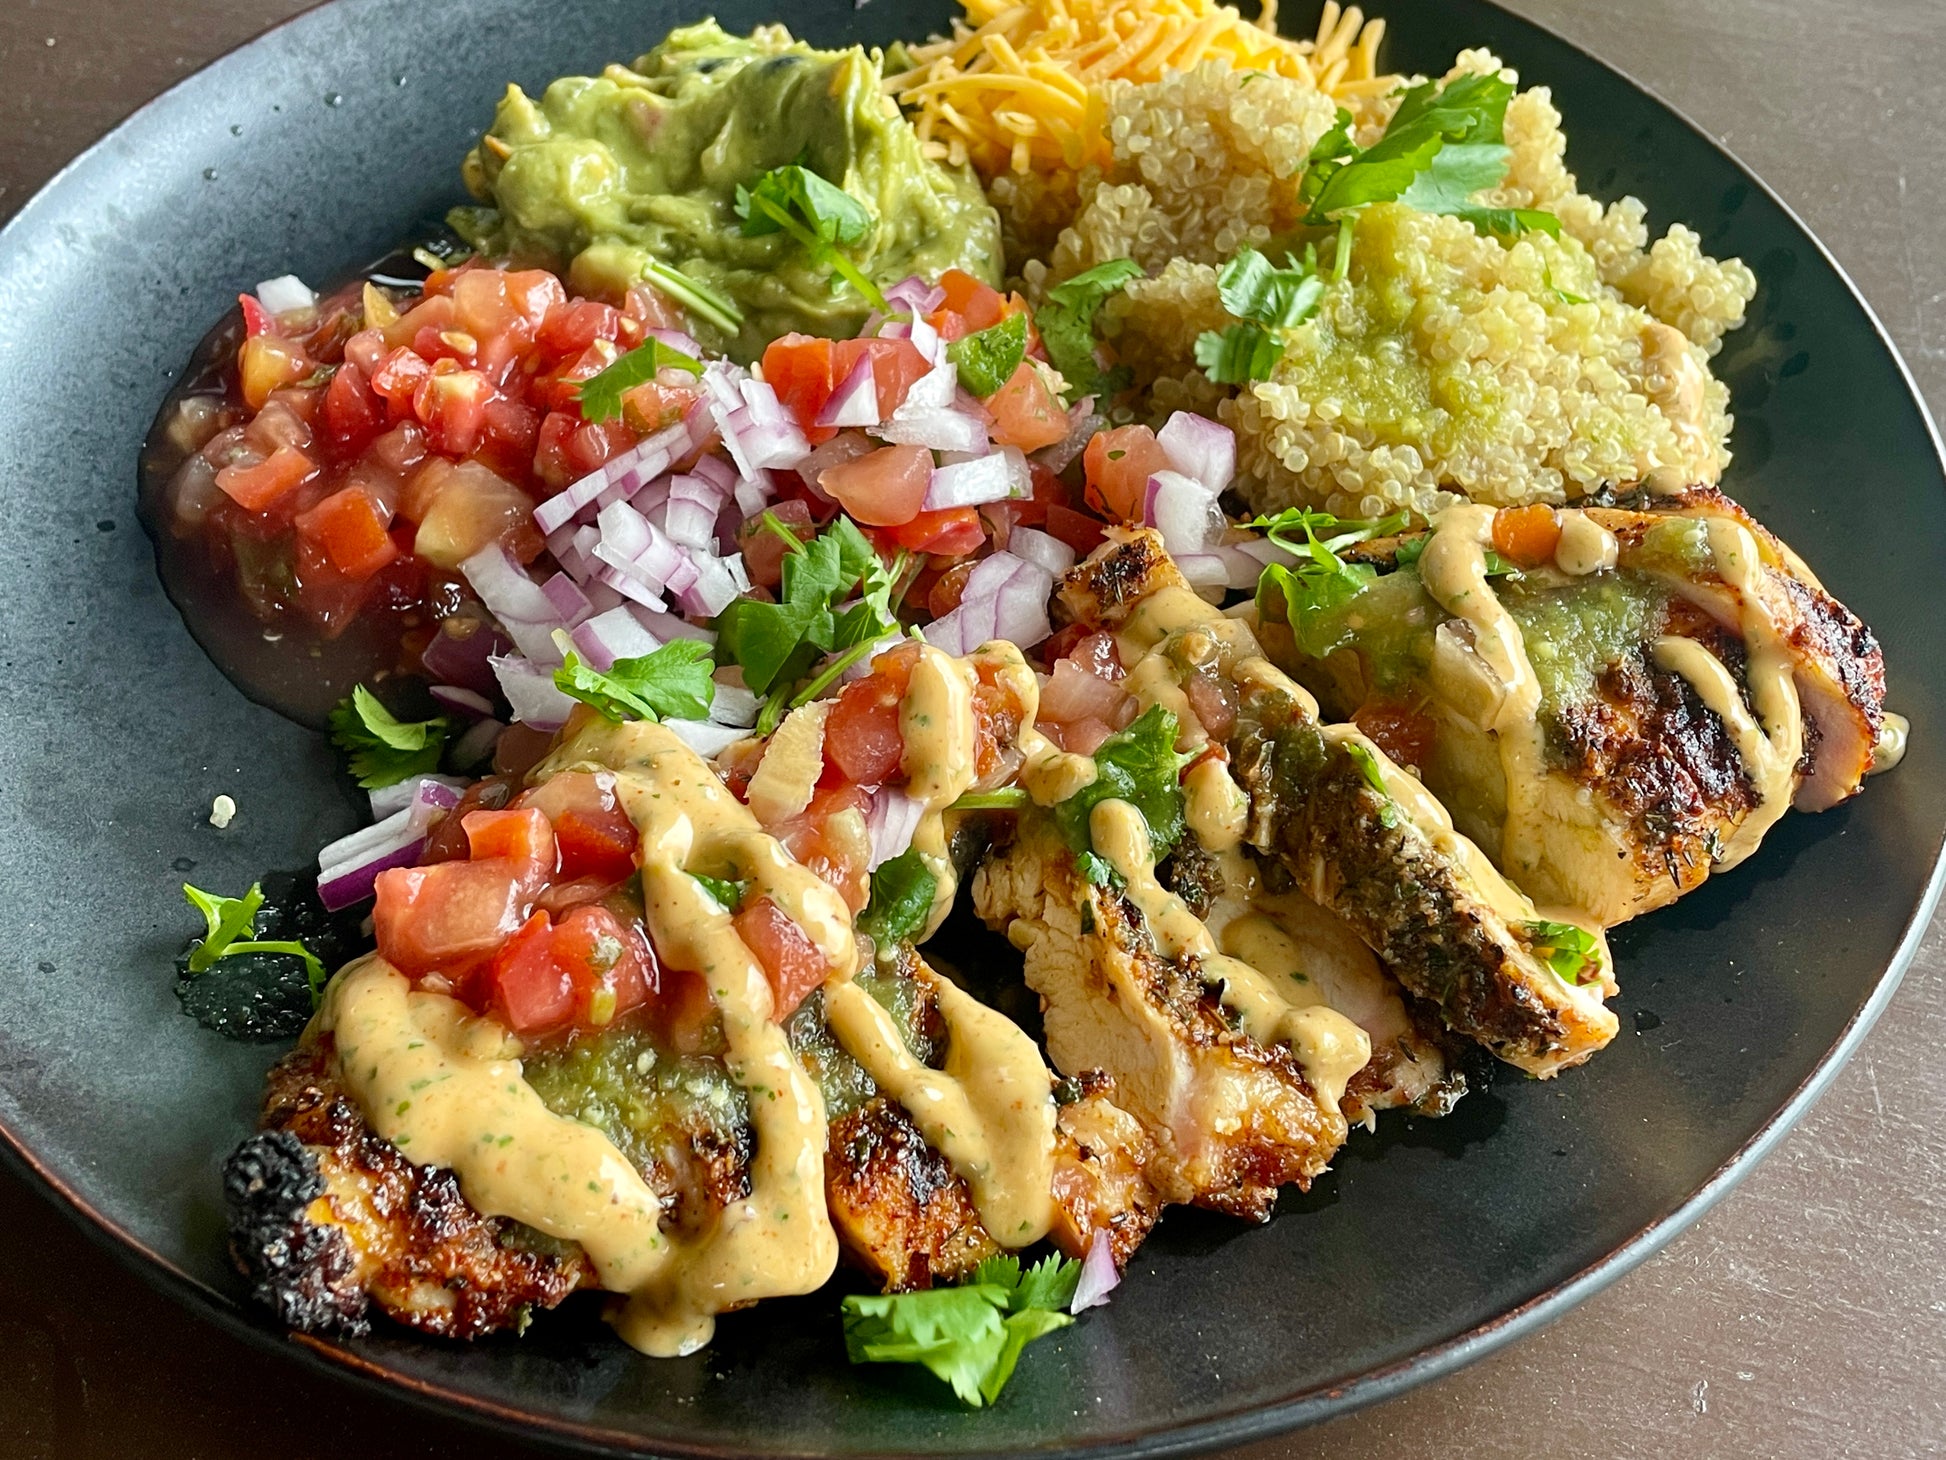 Spicy Jamaican Jerk chicken with a chili lime sauce